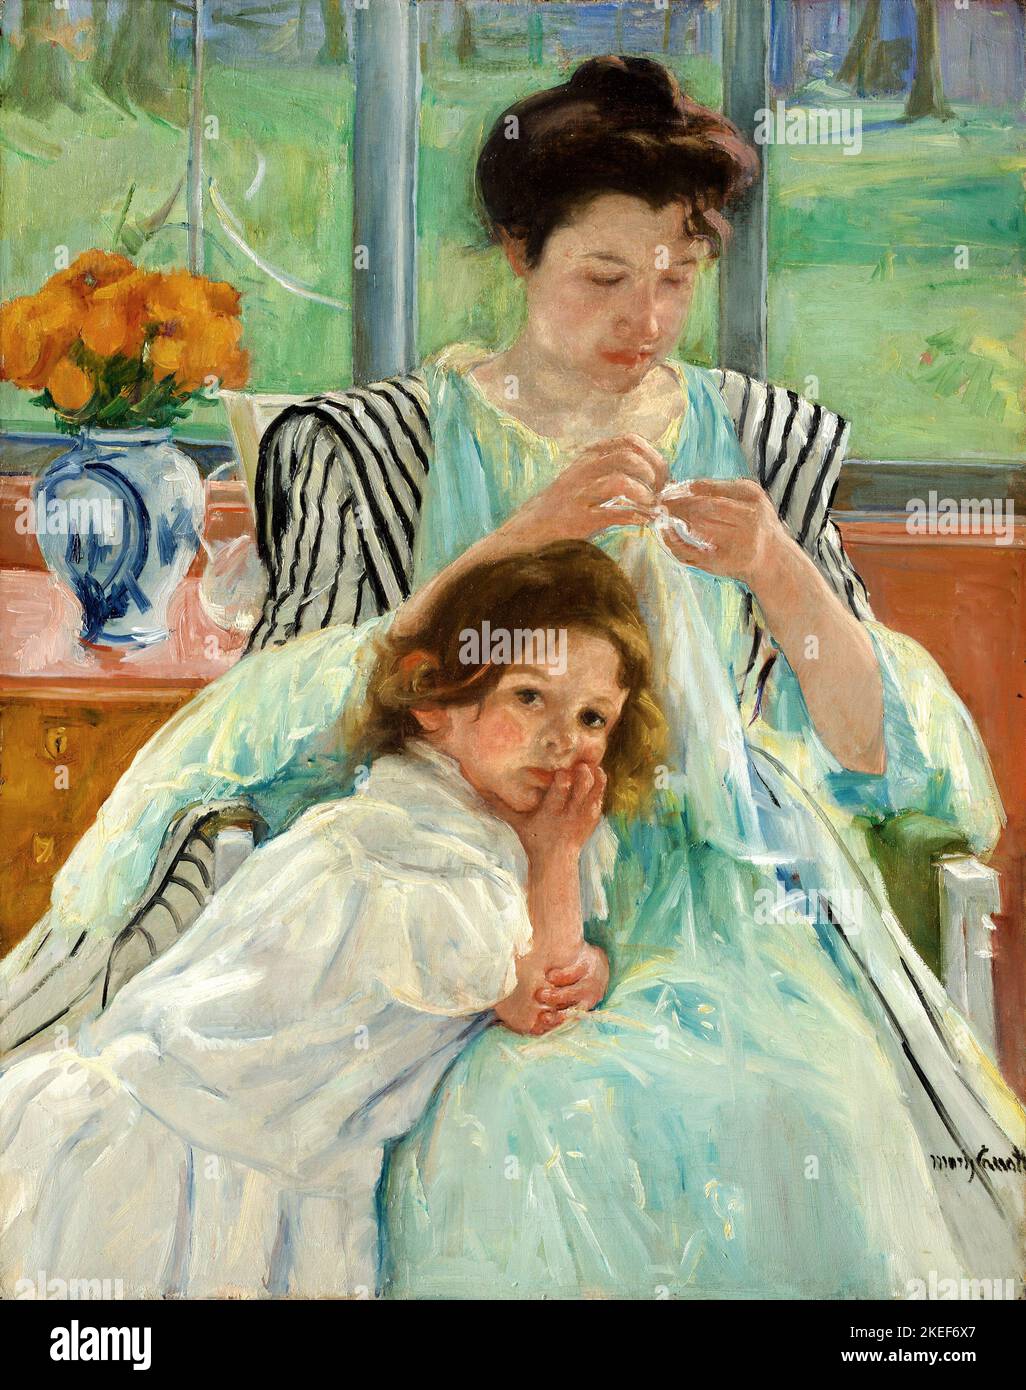 Mary Cassatt, Young Mother Sewing, 1900, Oil on canvas, National Gallery of Art, Washington, D.C., USA. Stock Photo